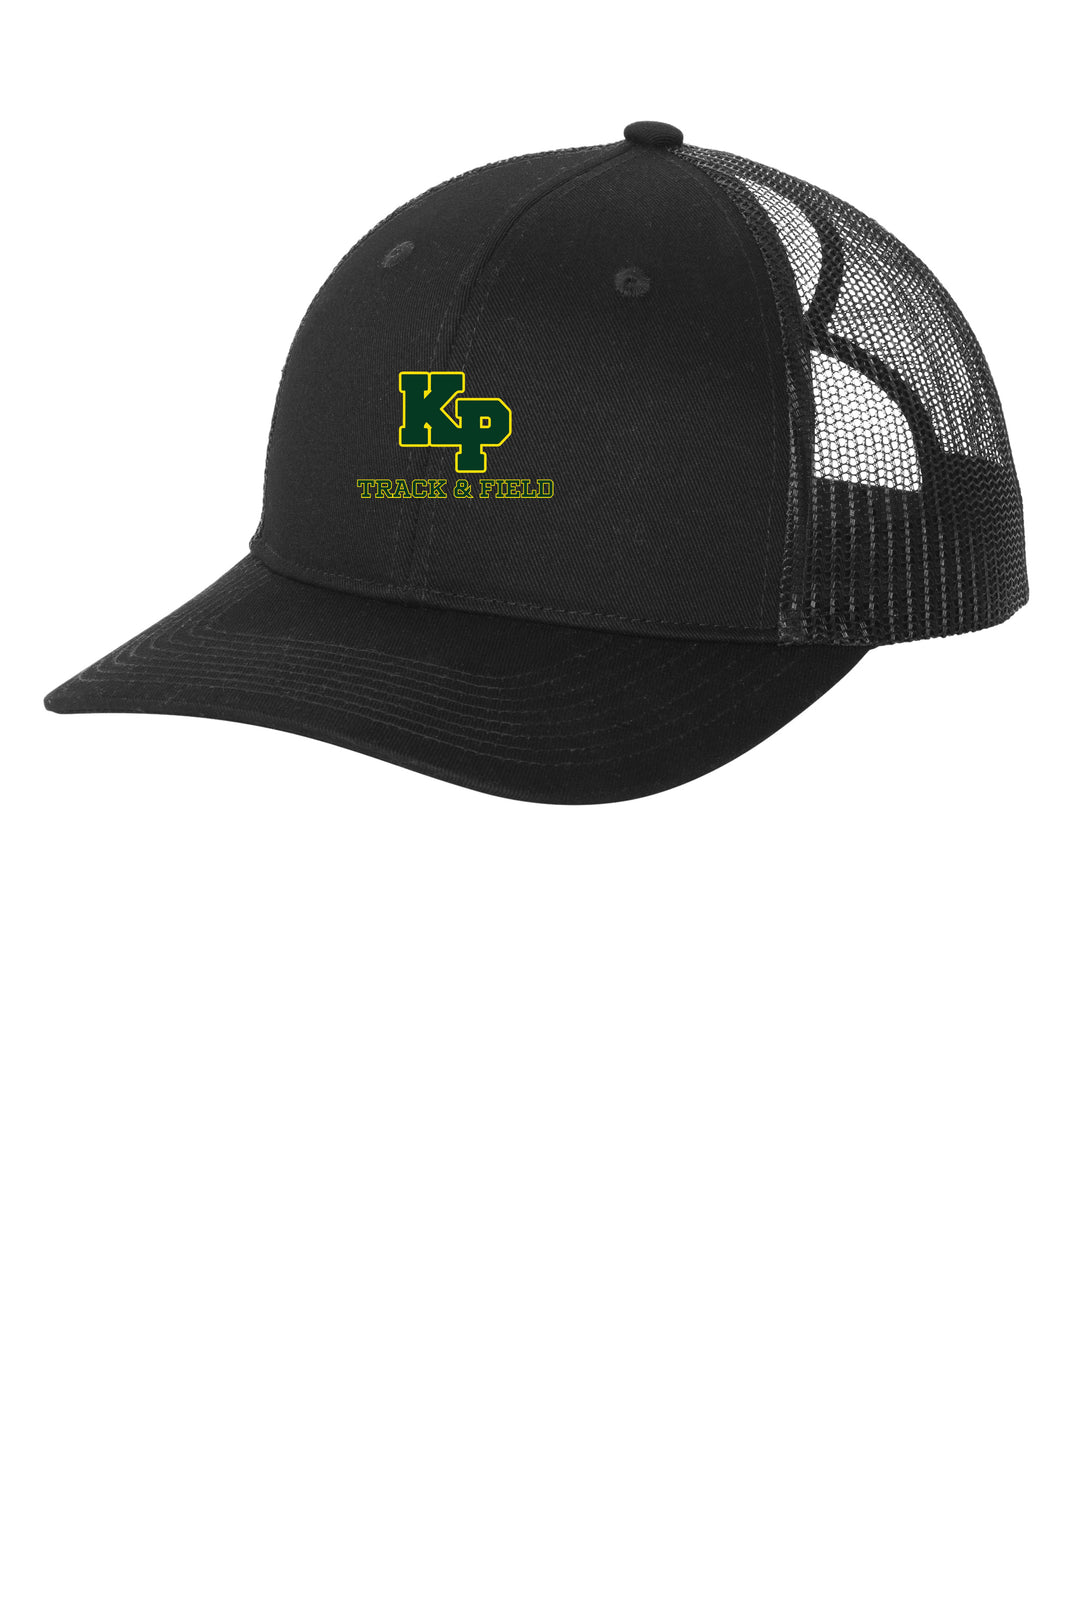 King Philip Track and Field Snapback Ponytail Trucker Cap (LC111)